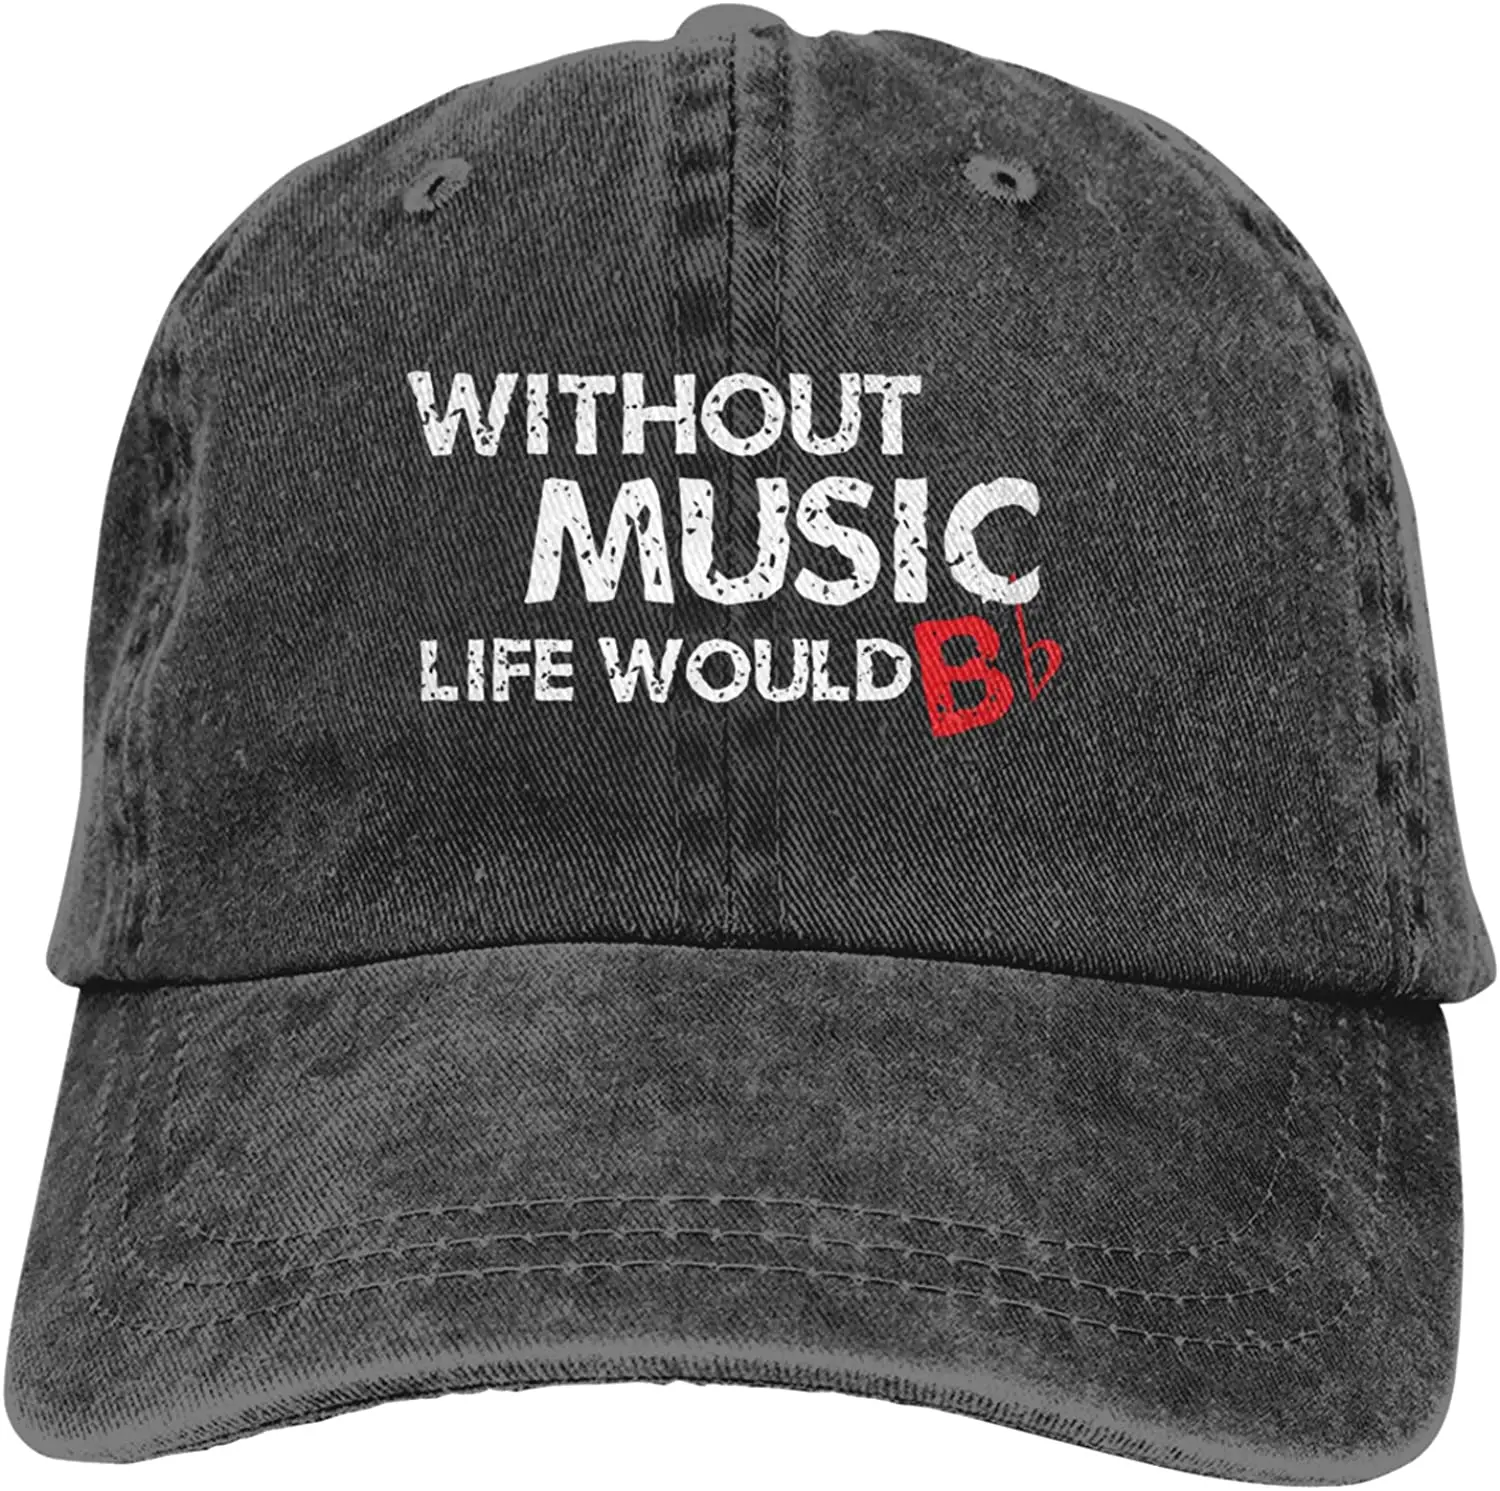 

Denim Cap Without Music Life Would B Flat Baseball Dad Cap Classic Adjustable Casual Sports for Men Women Hats